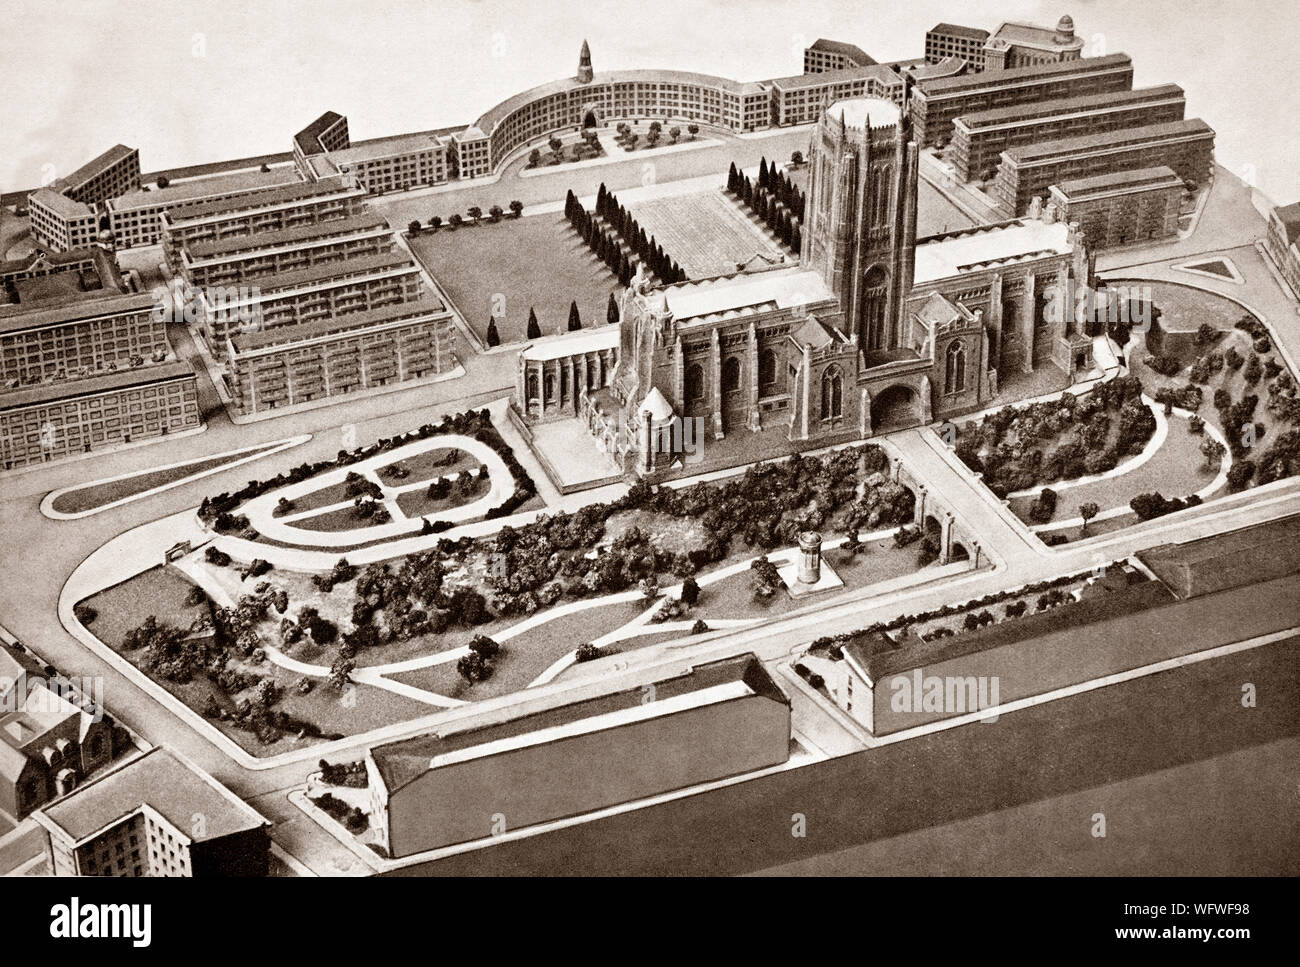 The original plans for the Anglican Liverpool Cathedral, the largest cathedral and religious building in Britain, built on St James's Mount in Liverpool.  Based on a design by 22-year-old Giles Gilbert Scott, who was still an articled pupil and had no existing buildings to his credit, it was constructed between 1904 and 1978, however the bridge over the cemetery was never built and the east doorway is now an outdoor cafe.  The total external length of the building,  is 207 yards (189 m) making it the longest cathedral in the world. It's full name is the Cathedral Church of Christ in Liverpool. Stock Photo